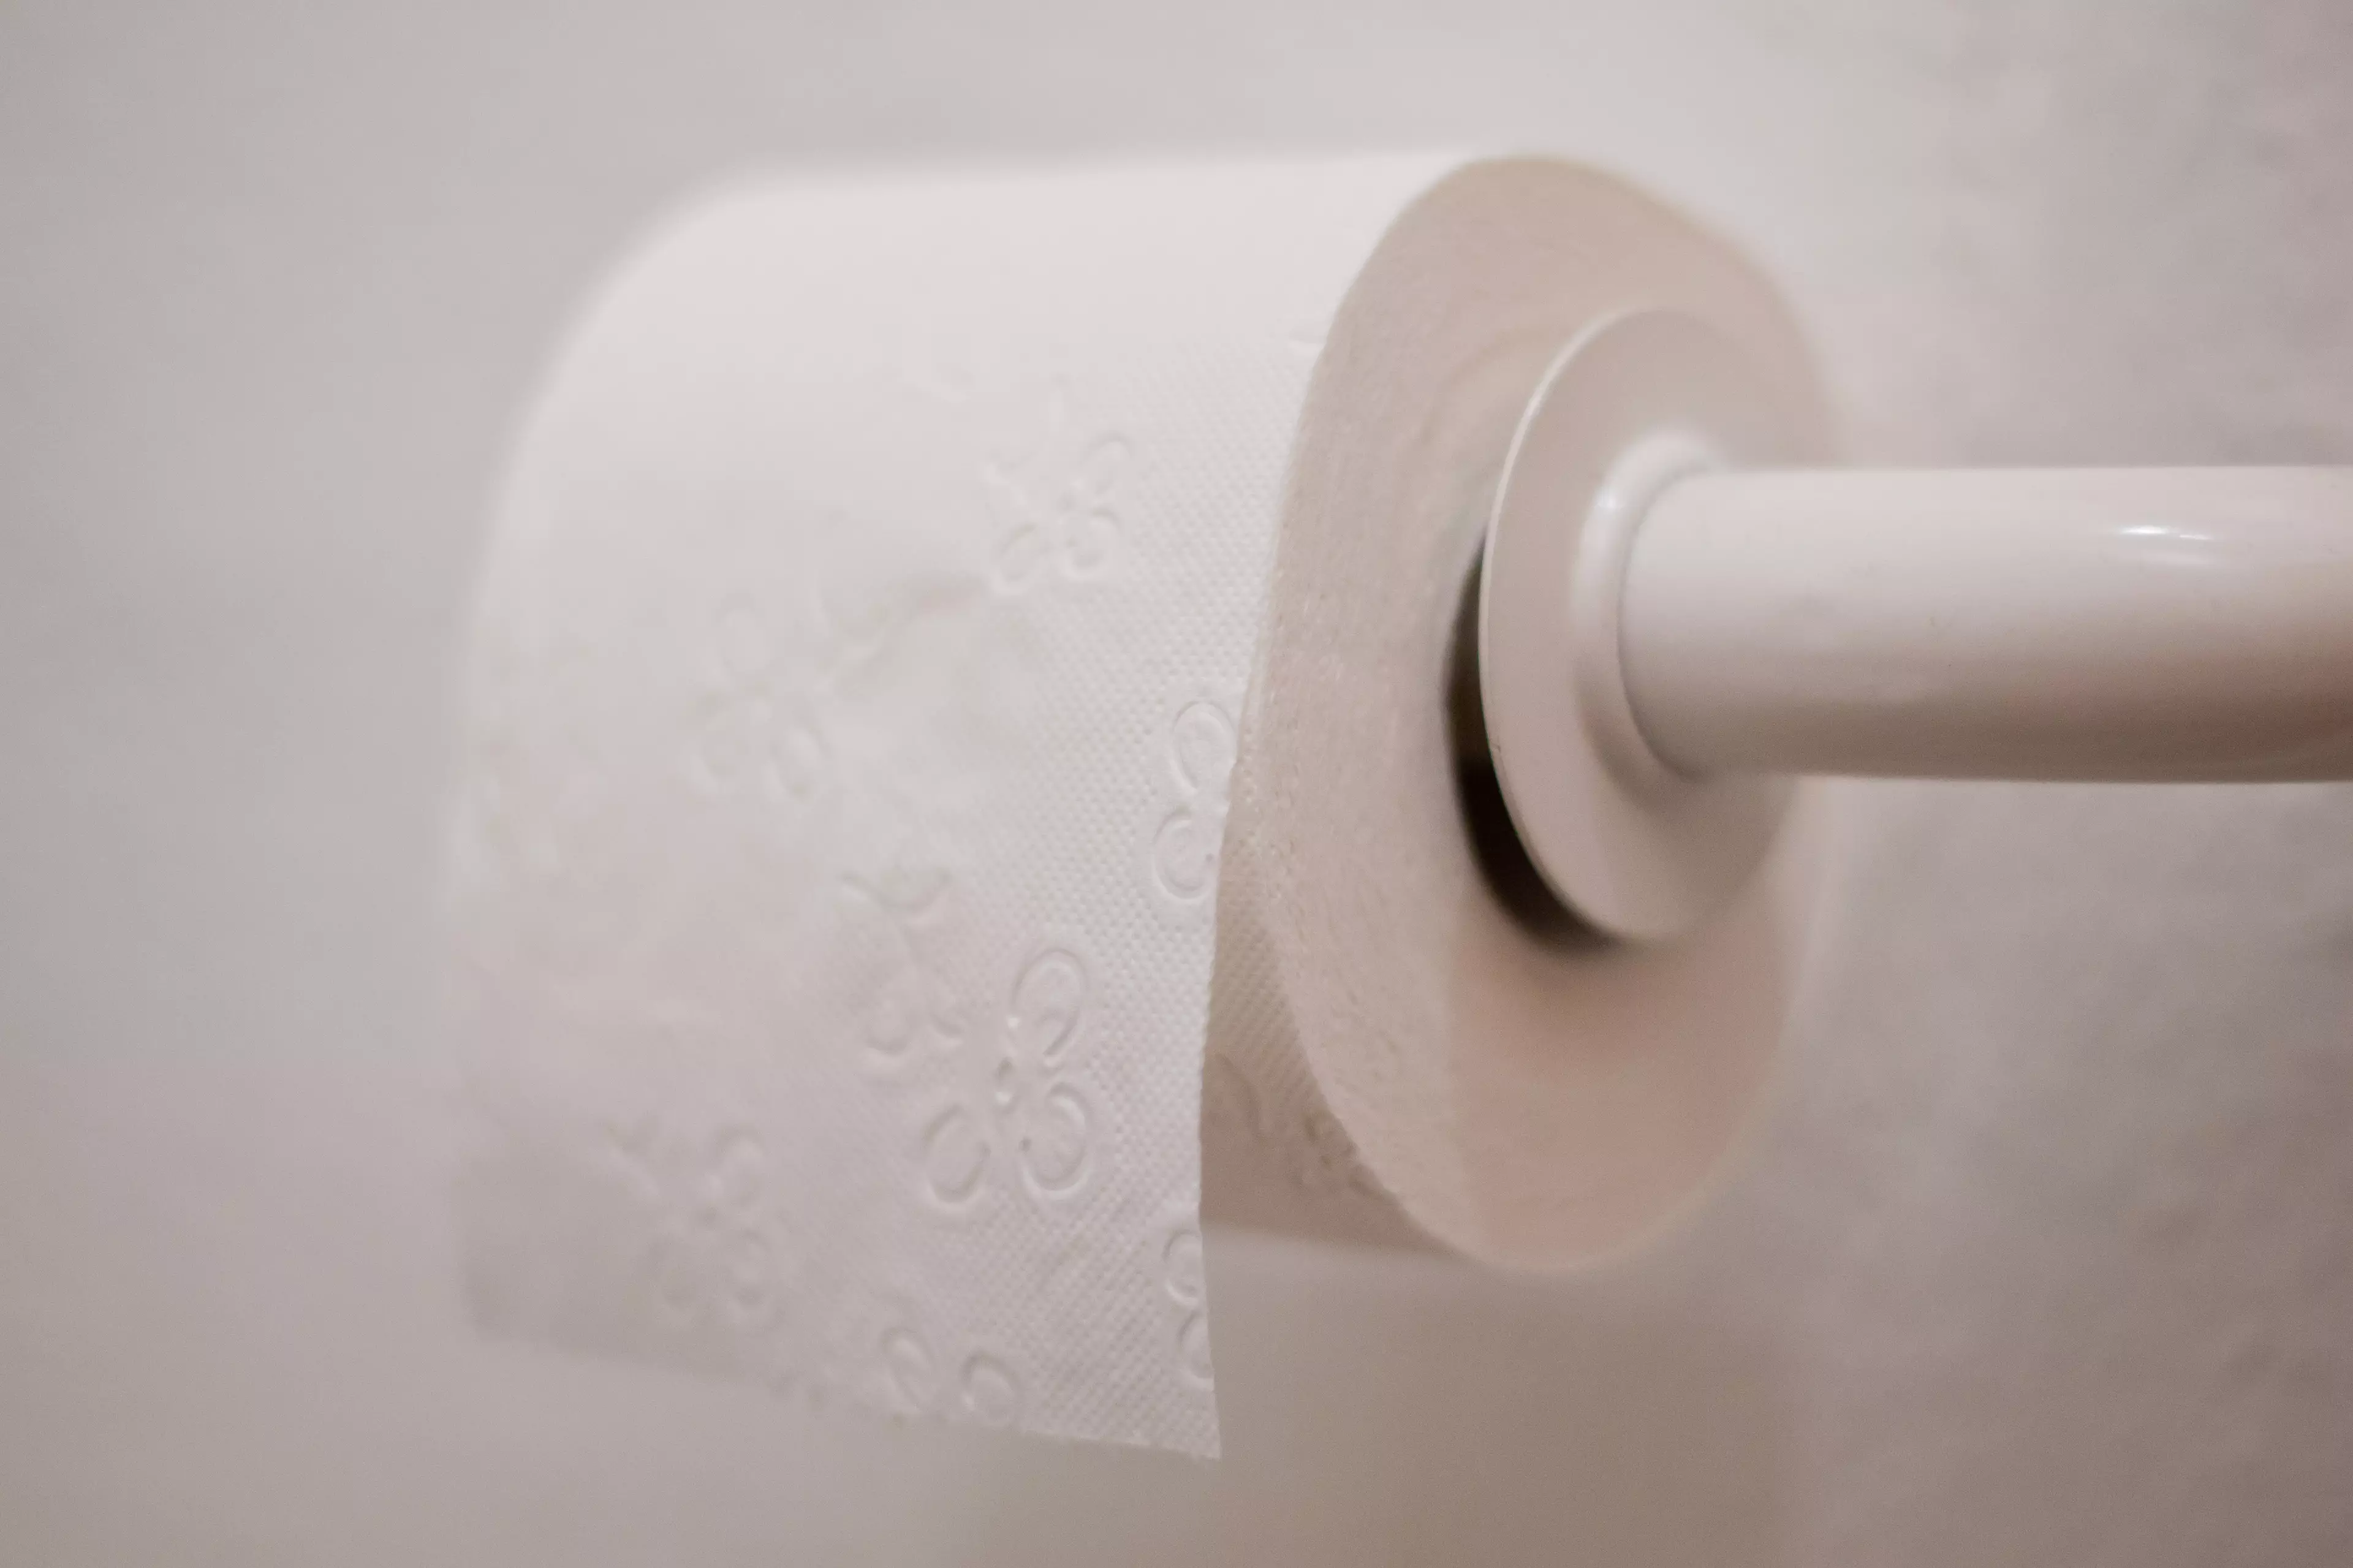 According to specialists, coming home after work or a holiday signals to our body it's time to go to the toilet.